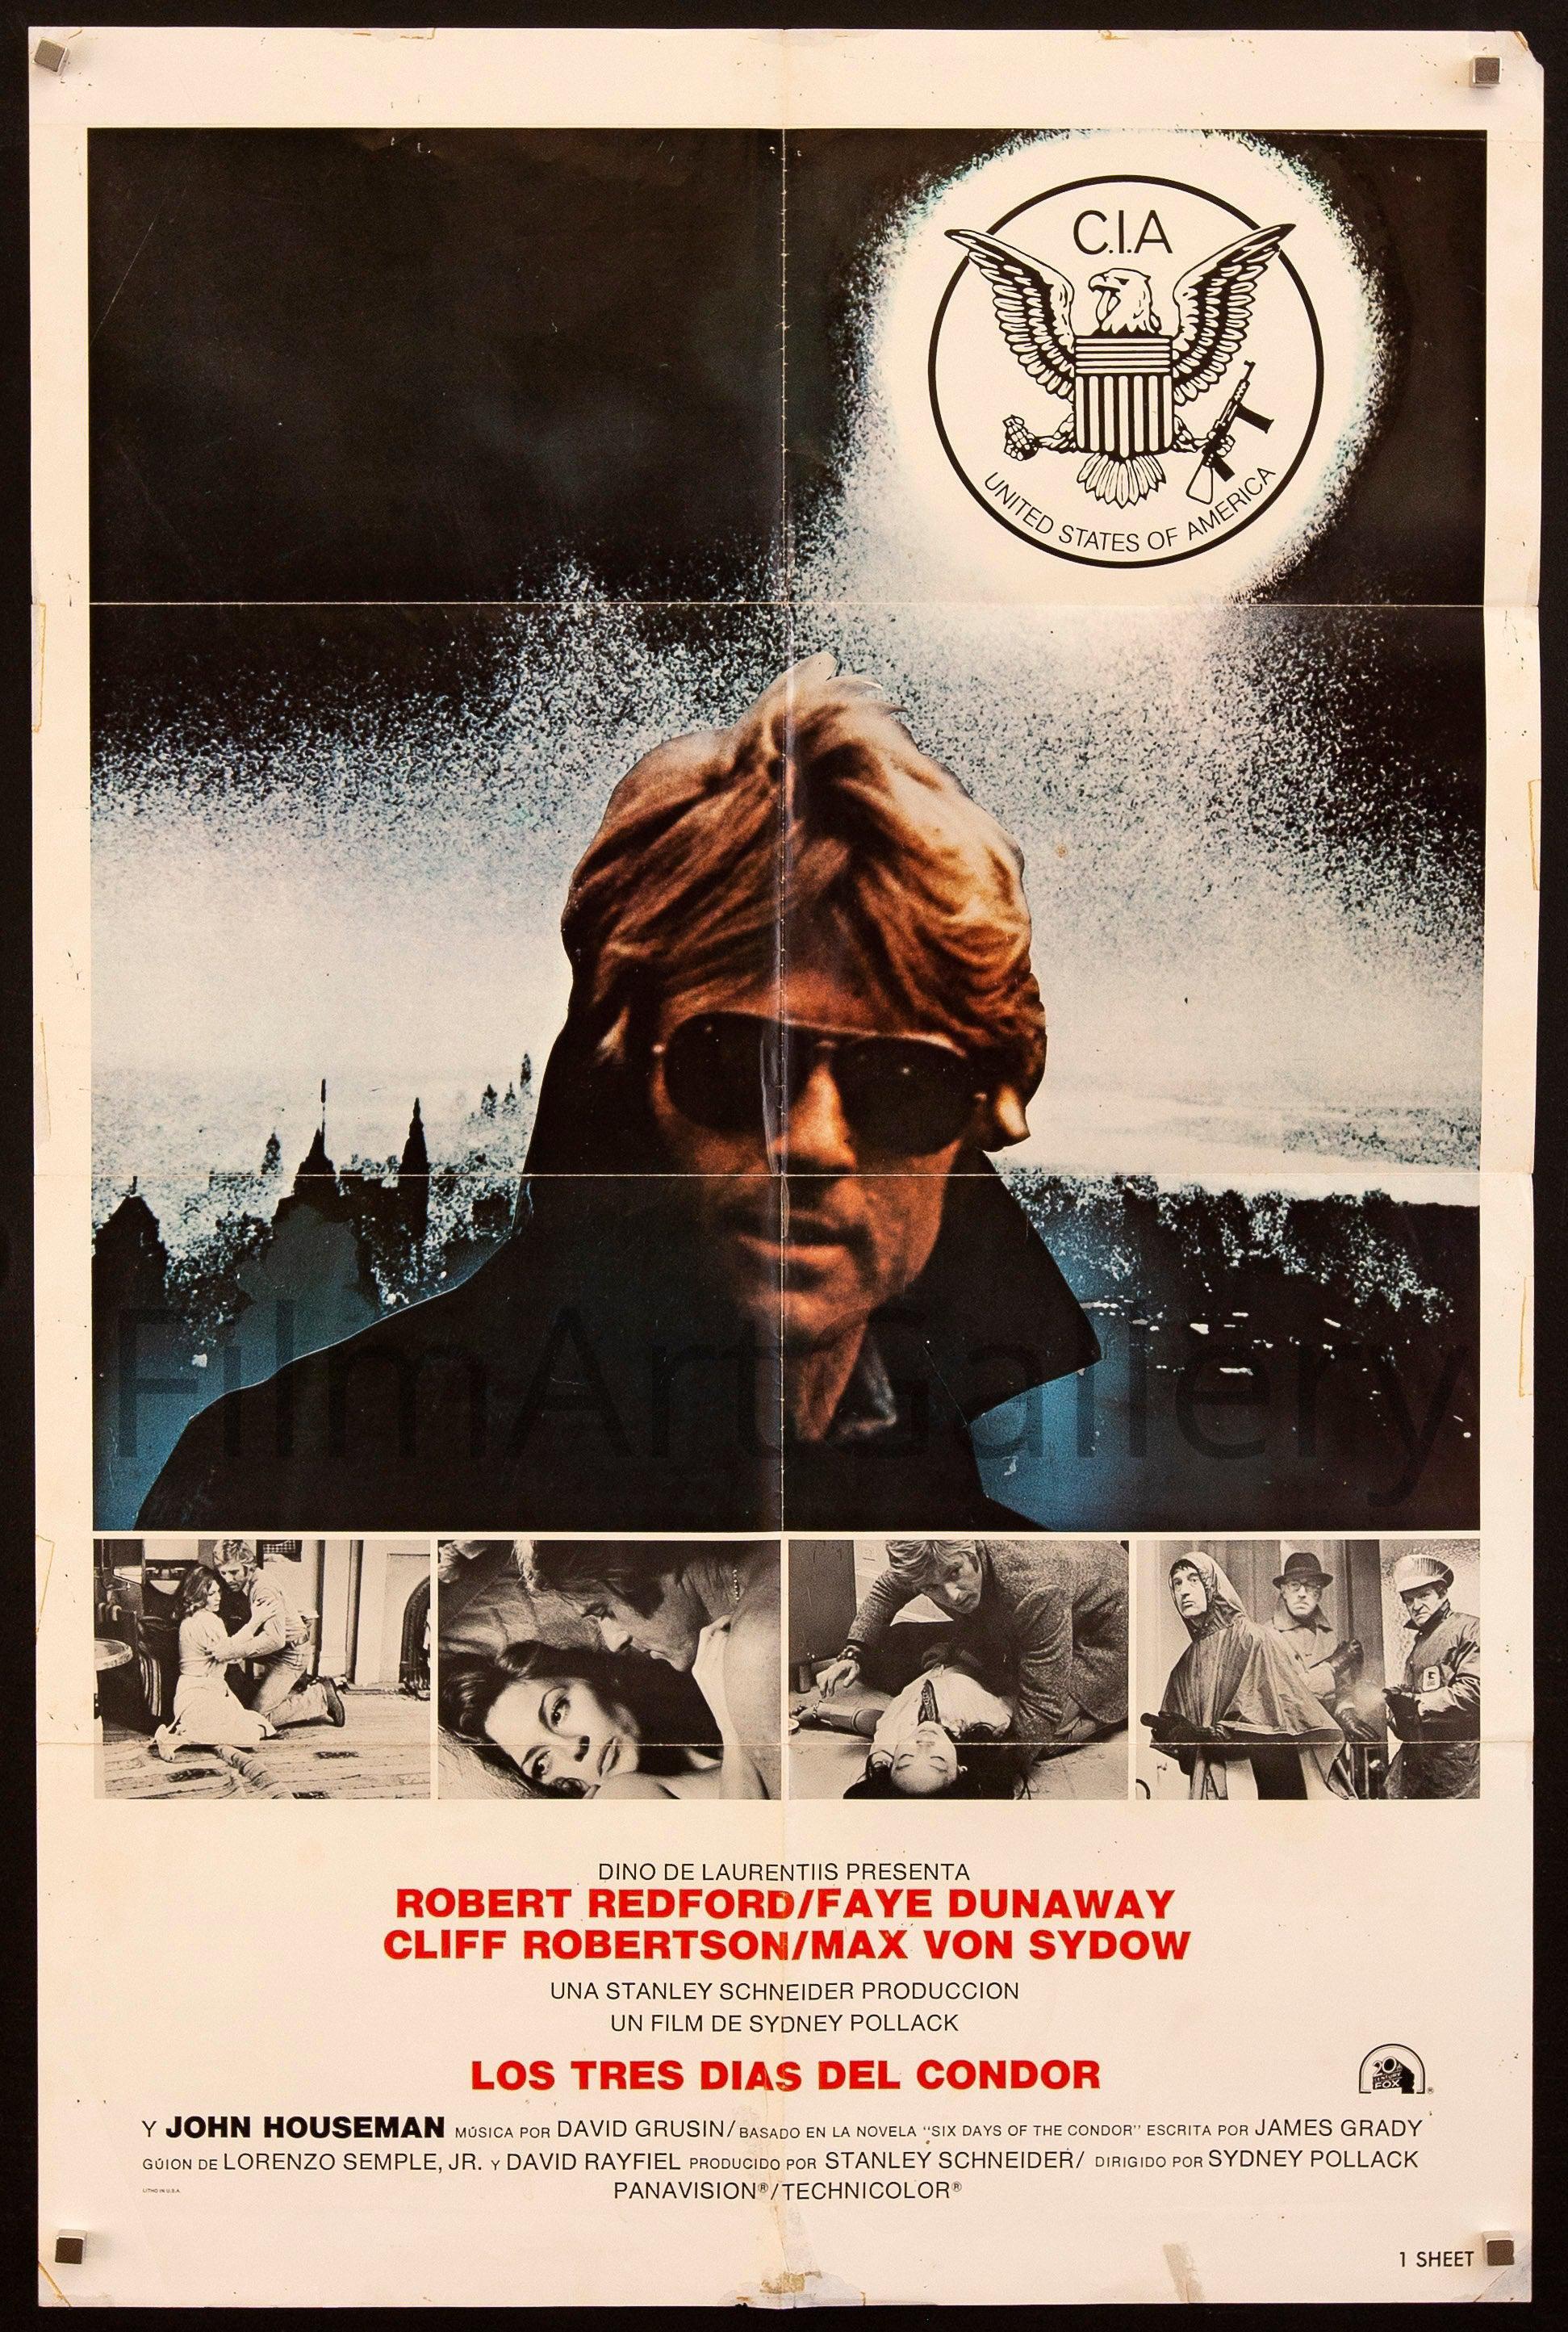 3 Days of the Condor Movie Poster 1975 1 Sheet (27x41)